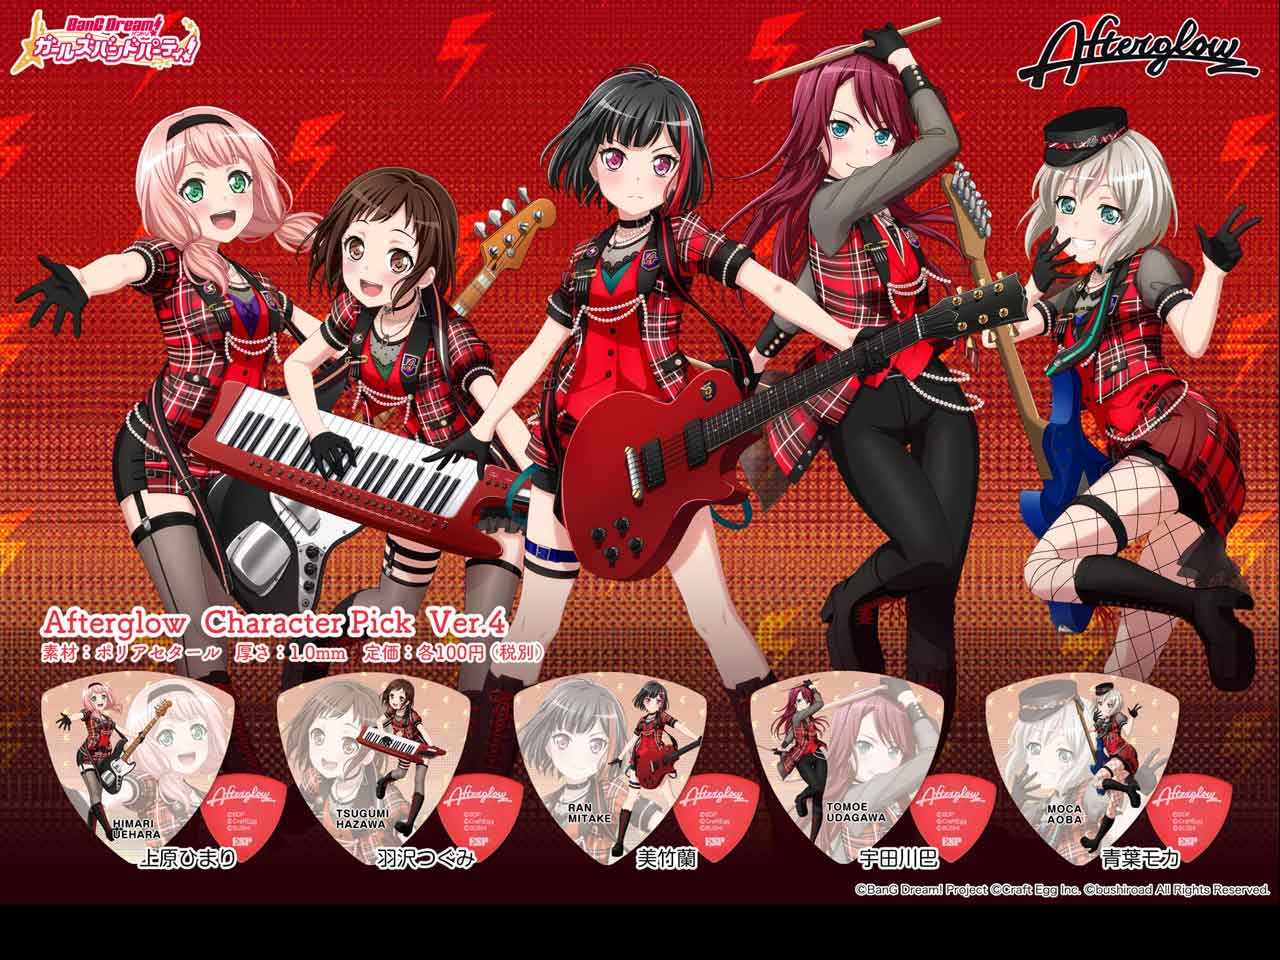 【ESP×BanG Dream!コラボピック】Afterglow Character Pick Ver.4 "上原ひまり"（GBP HIMARI AFTERGLOW 4）＆”ハメパチ” セット